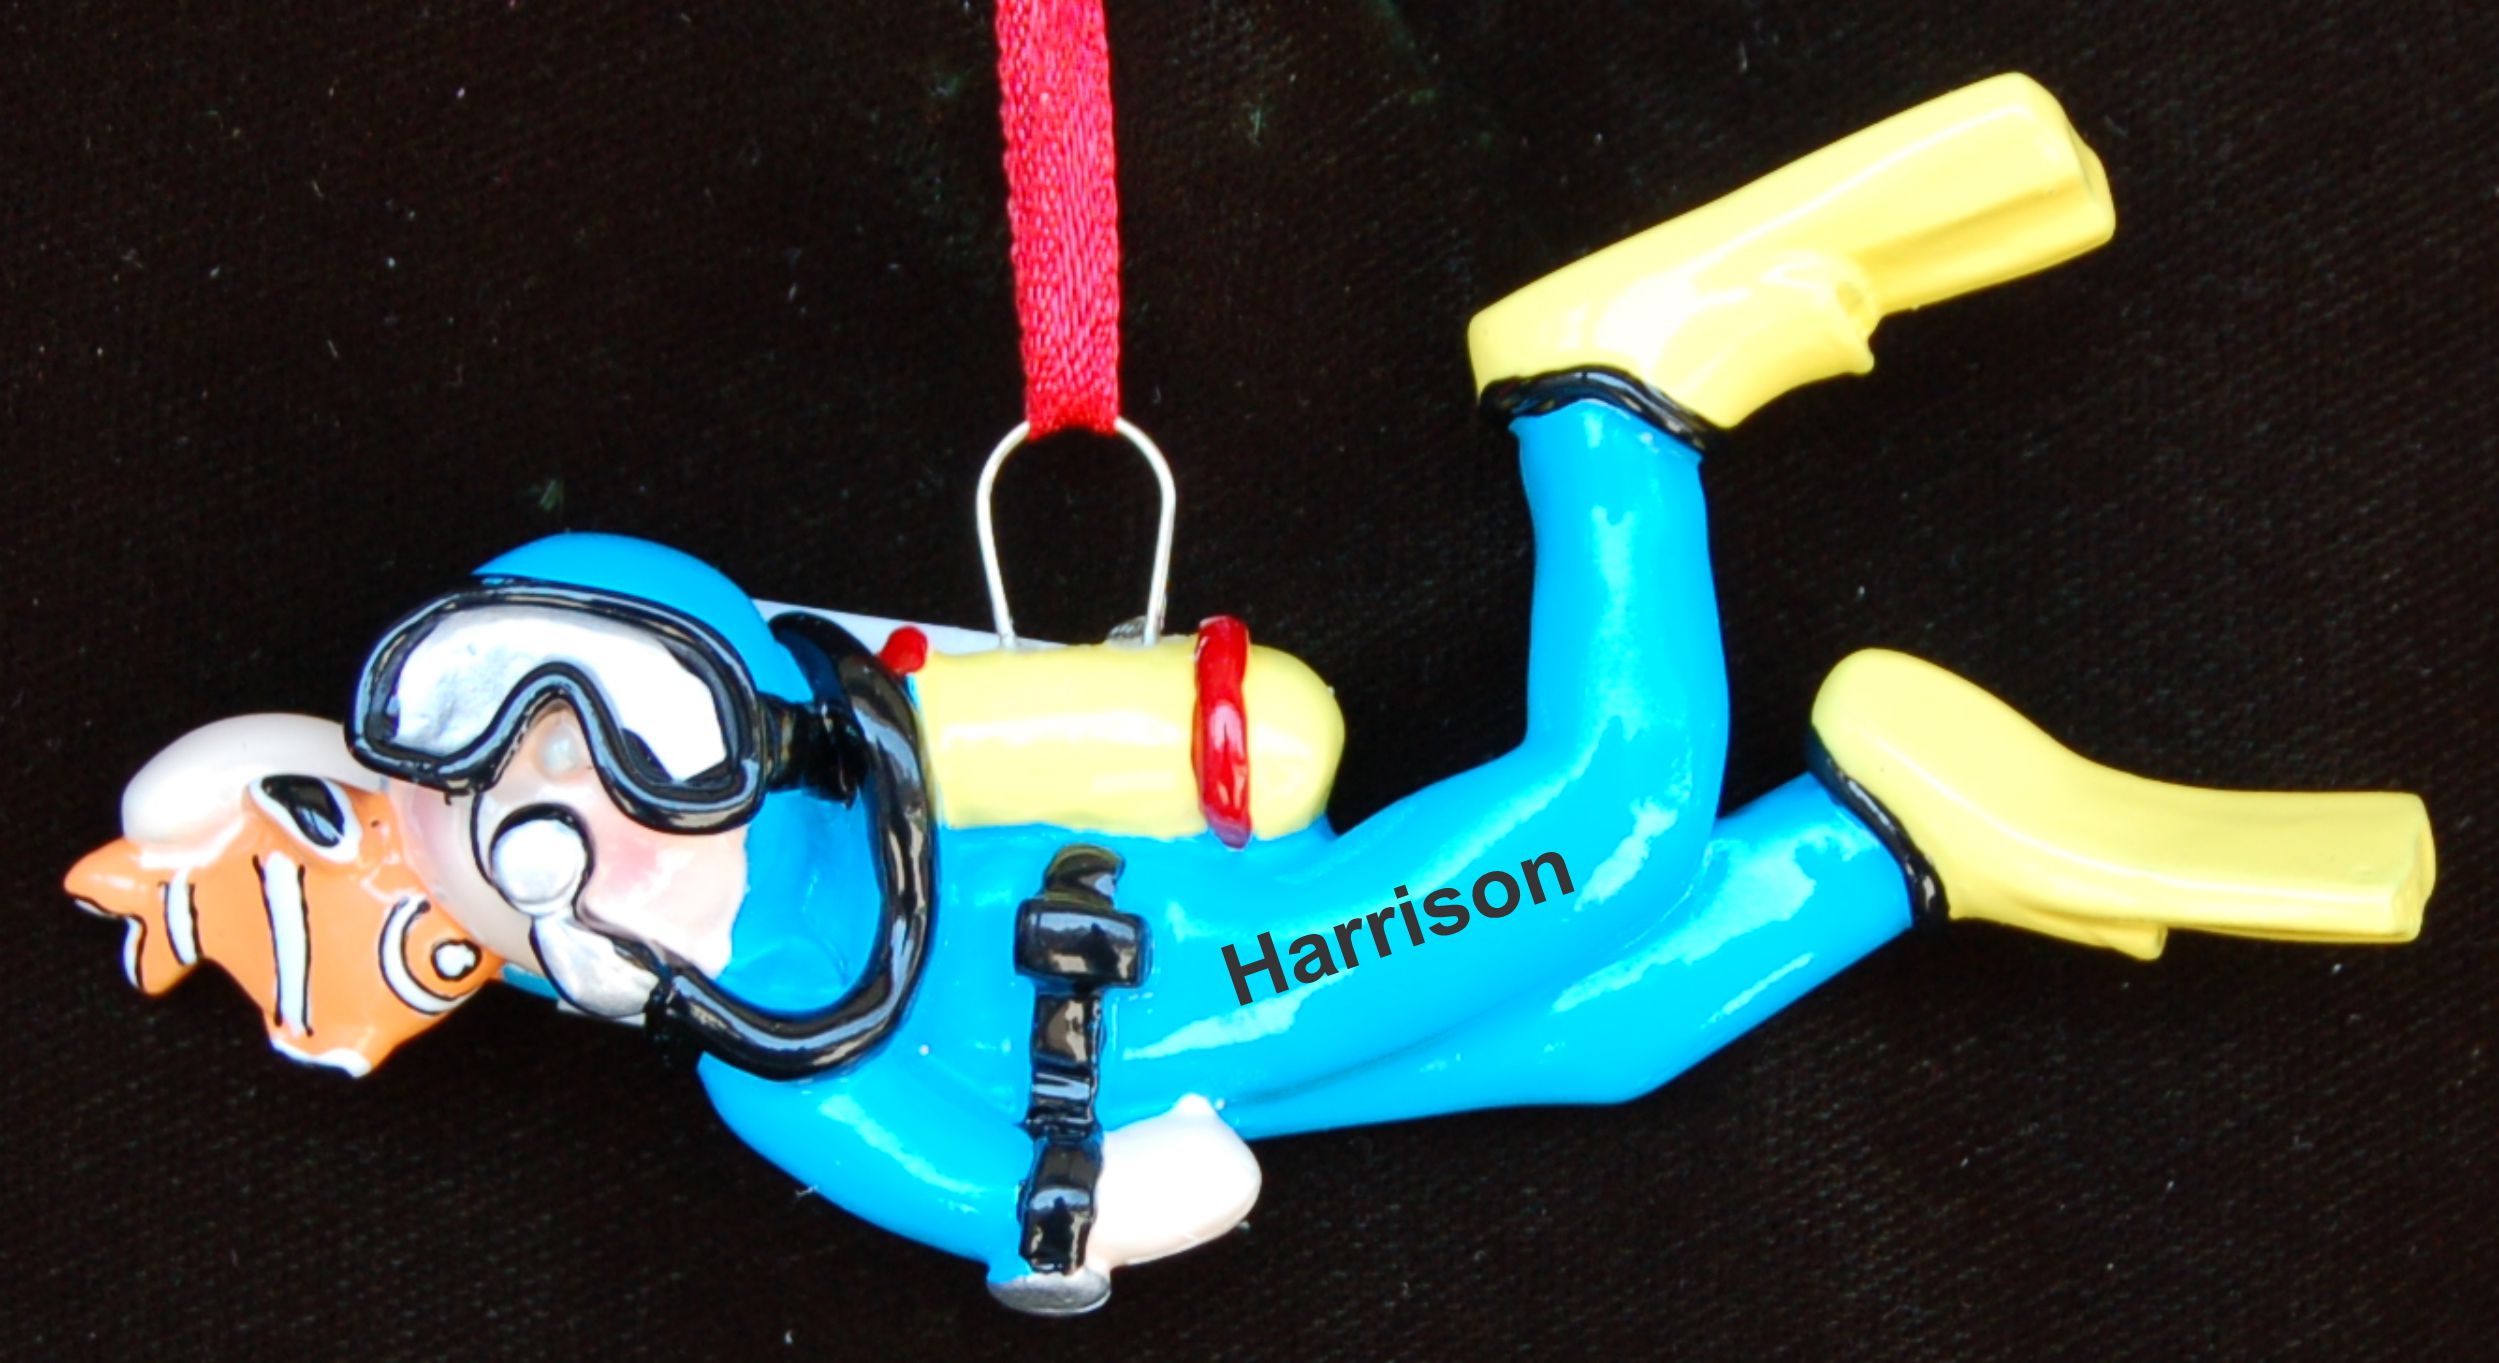 Scuba Christmas Ornament Male Personalized by RussellRhodes.com